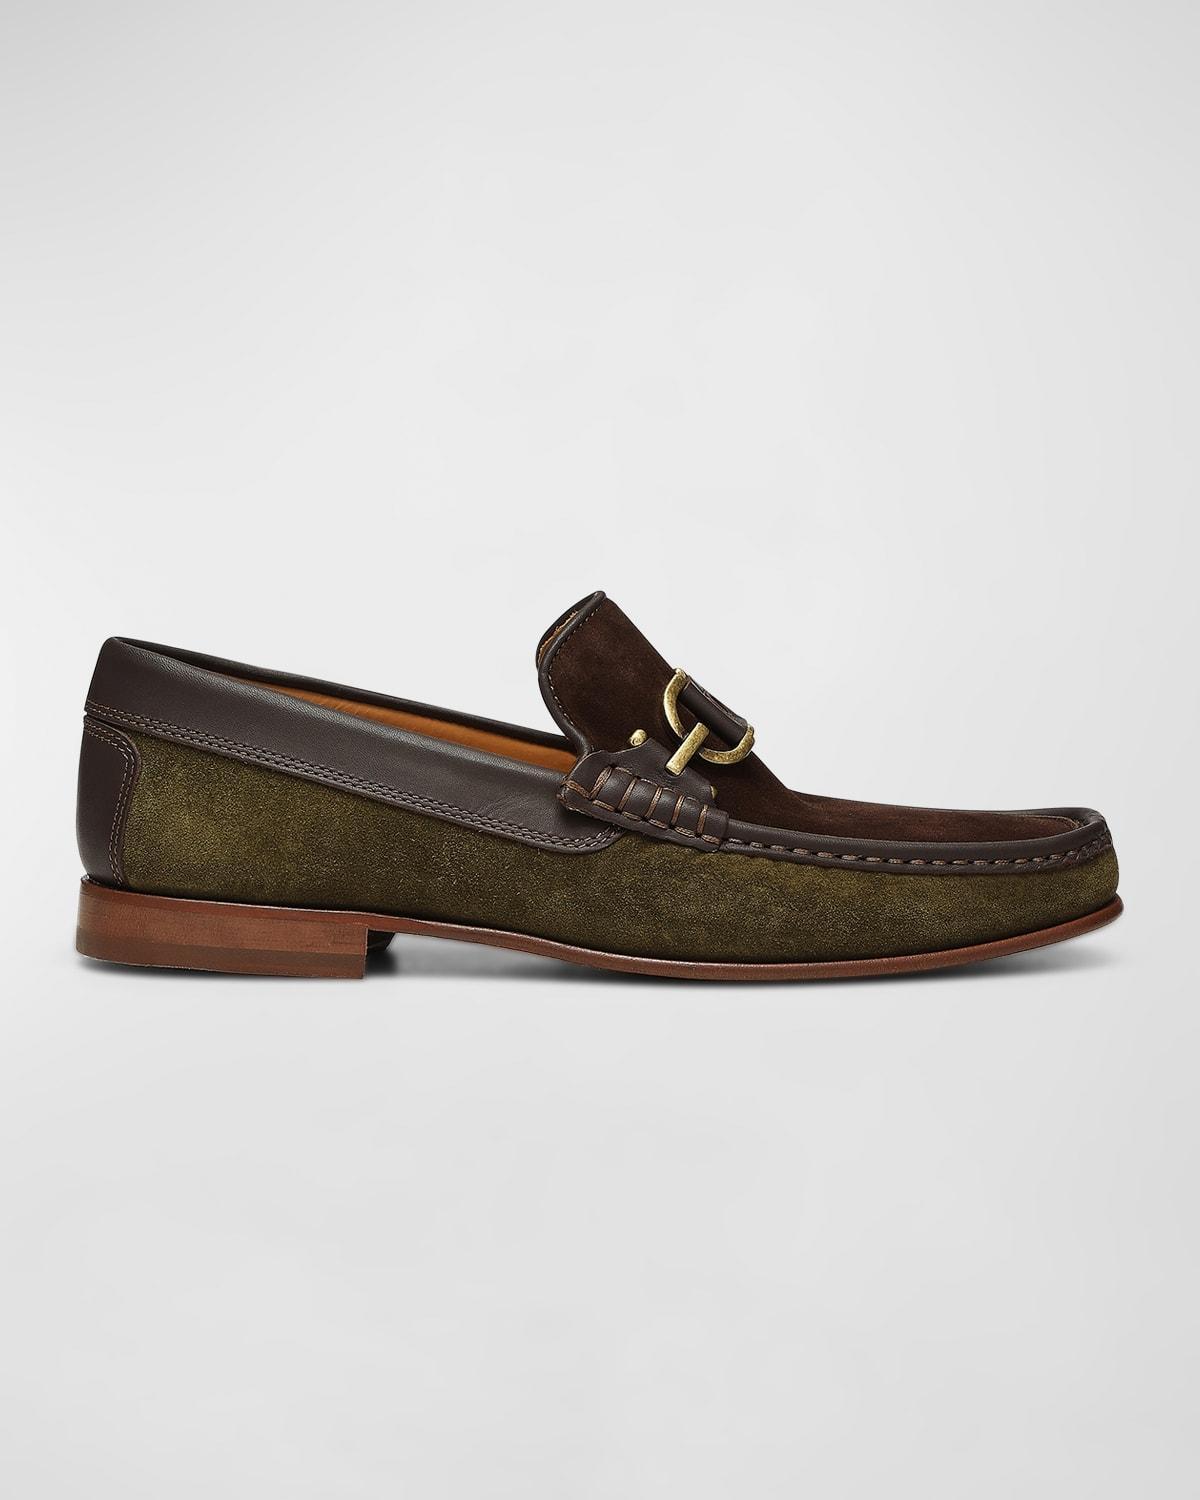 Mens Suede Loafers with Python Trim Product Image